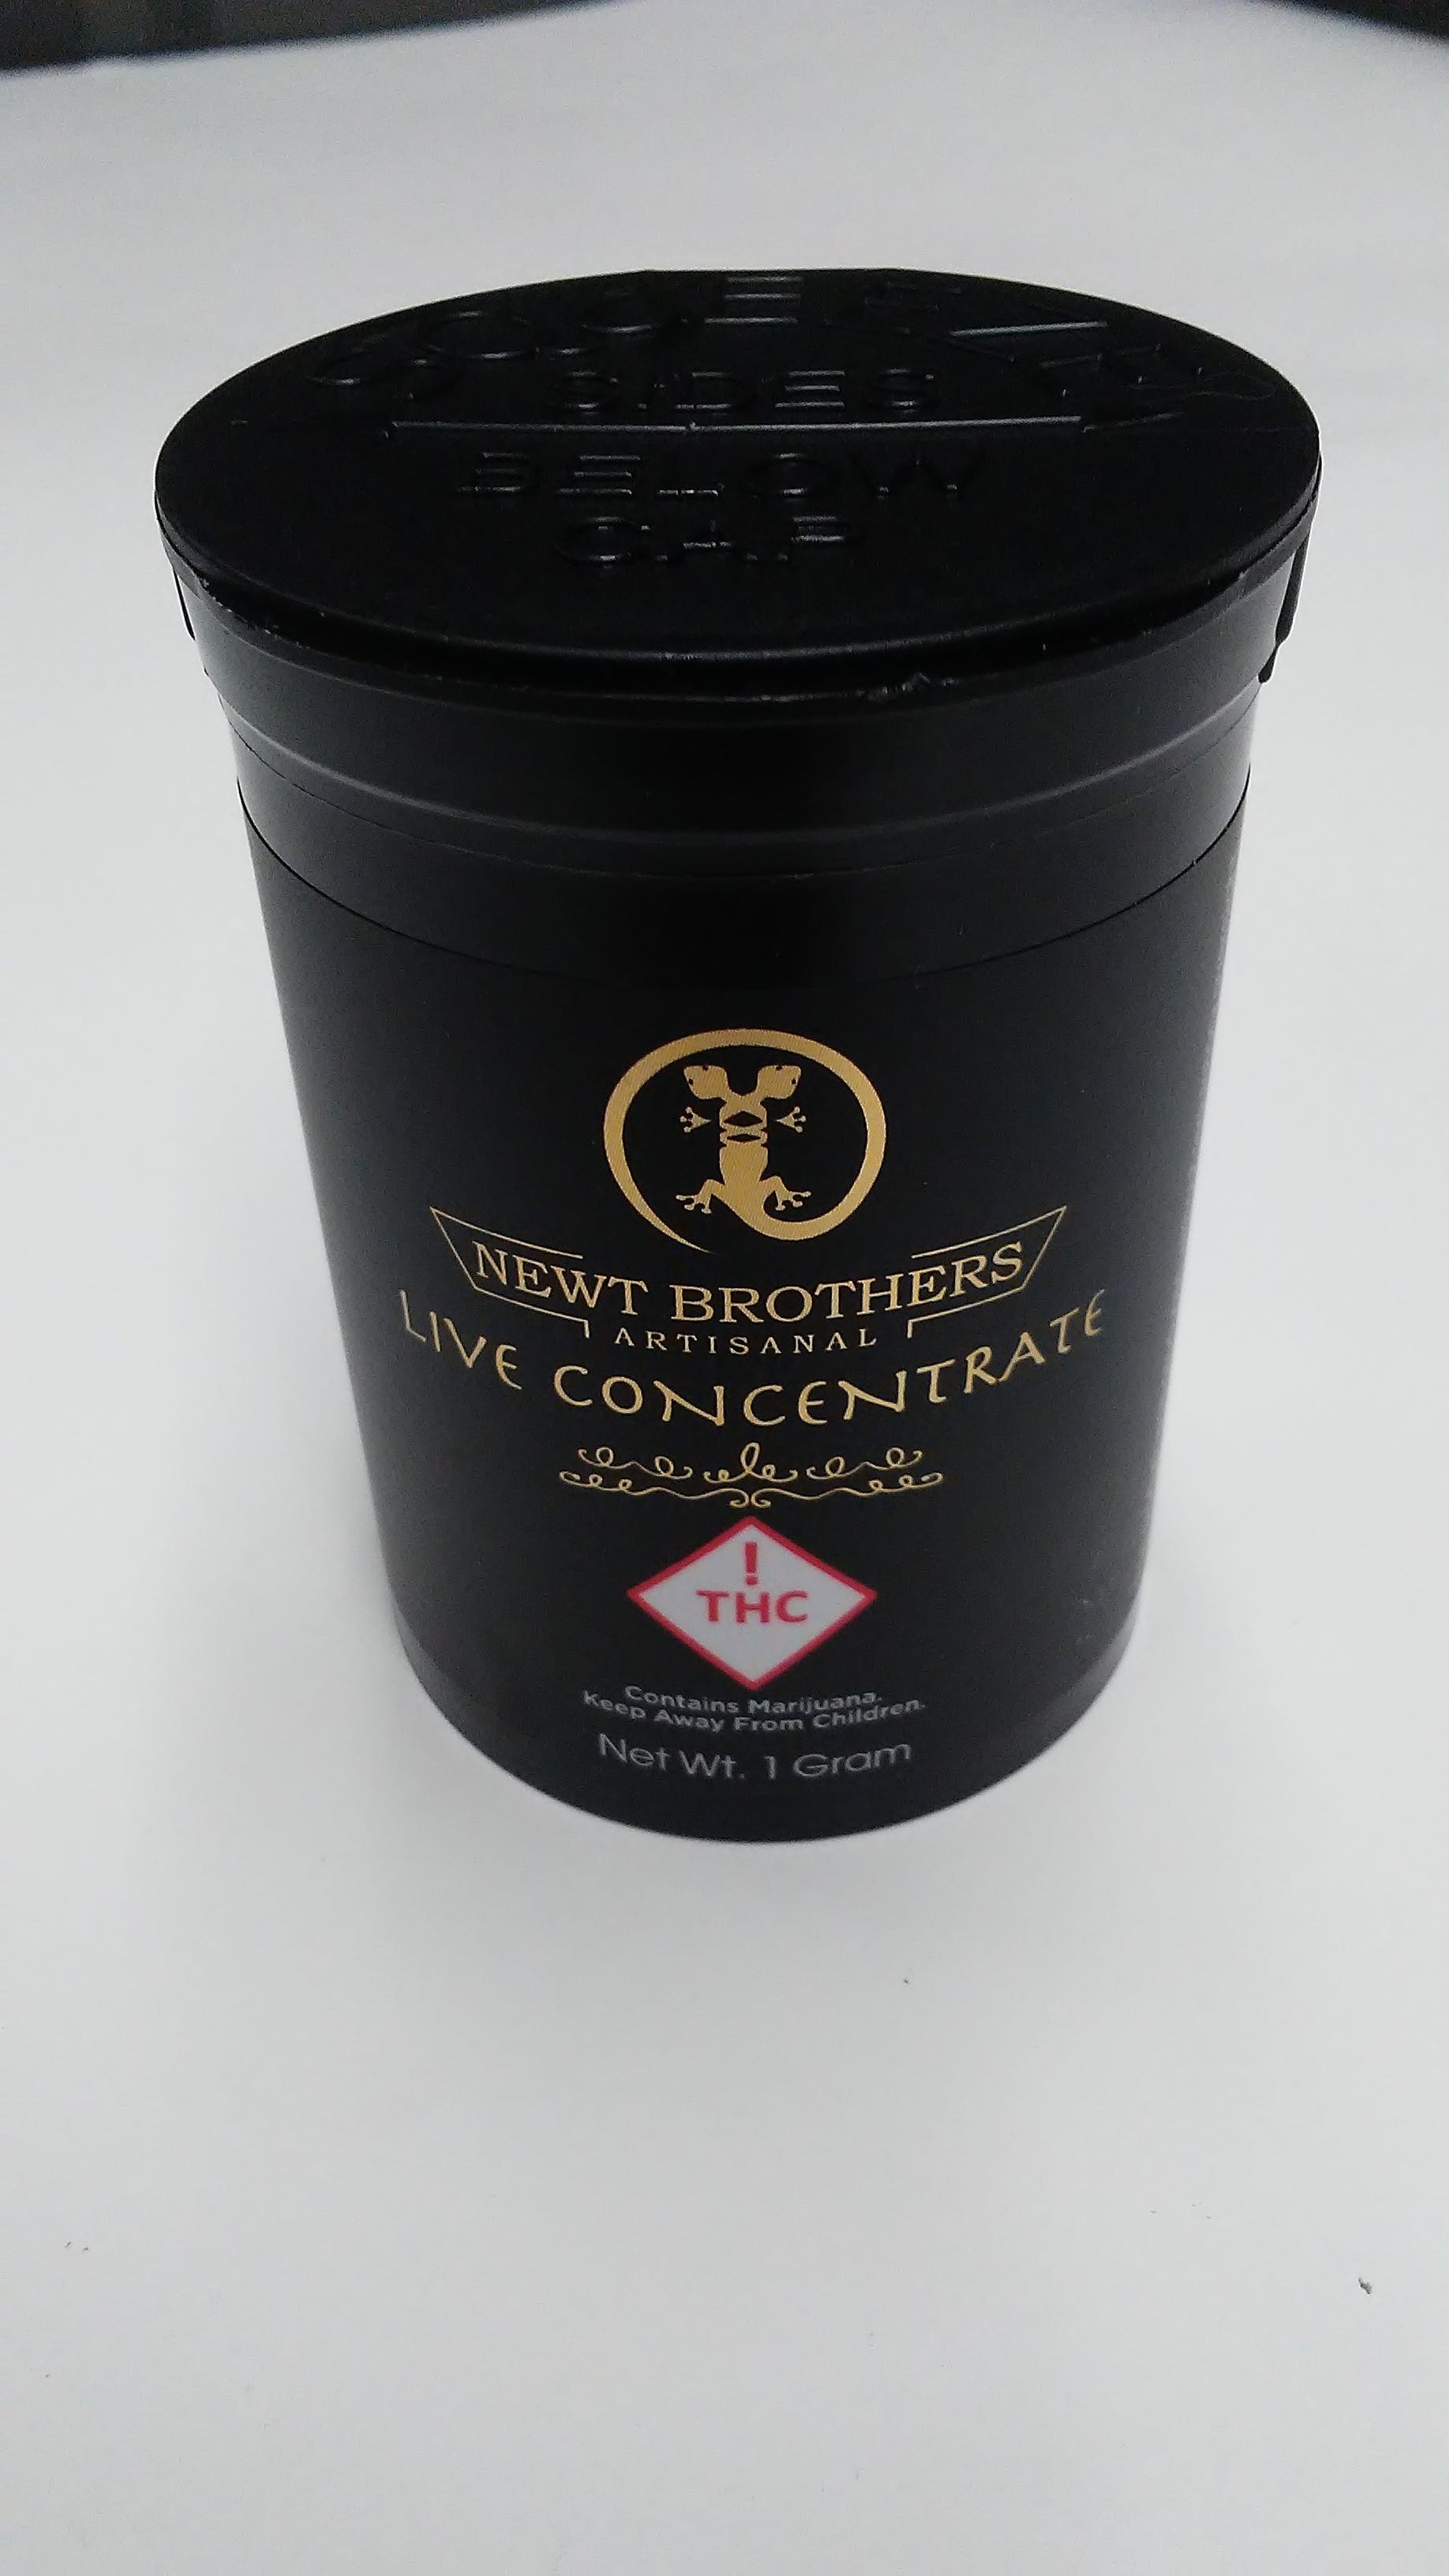 concentrate-newt-brothers-live-concentrates